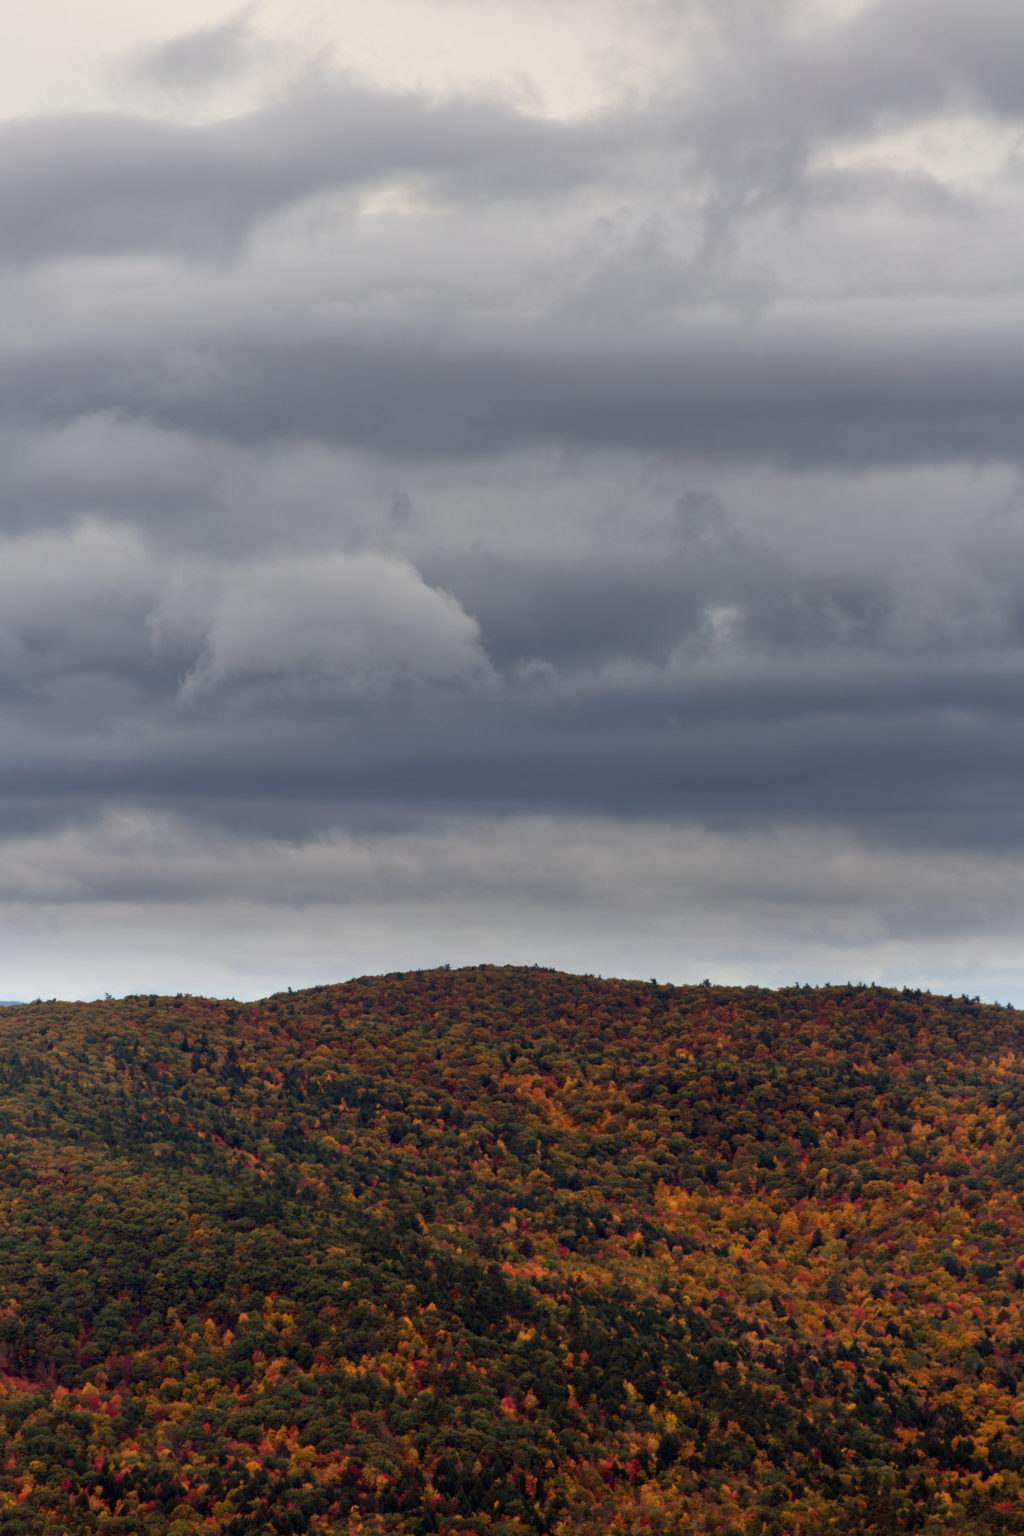 Clouds Over a Foliage Covered Mountain